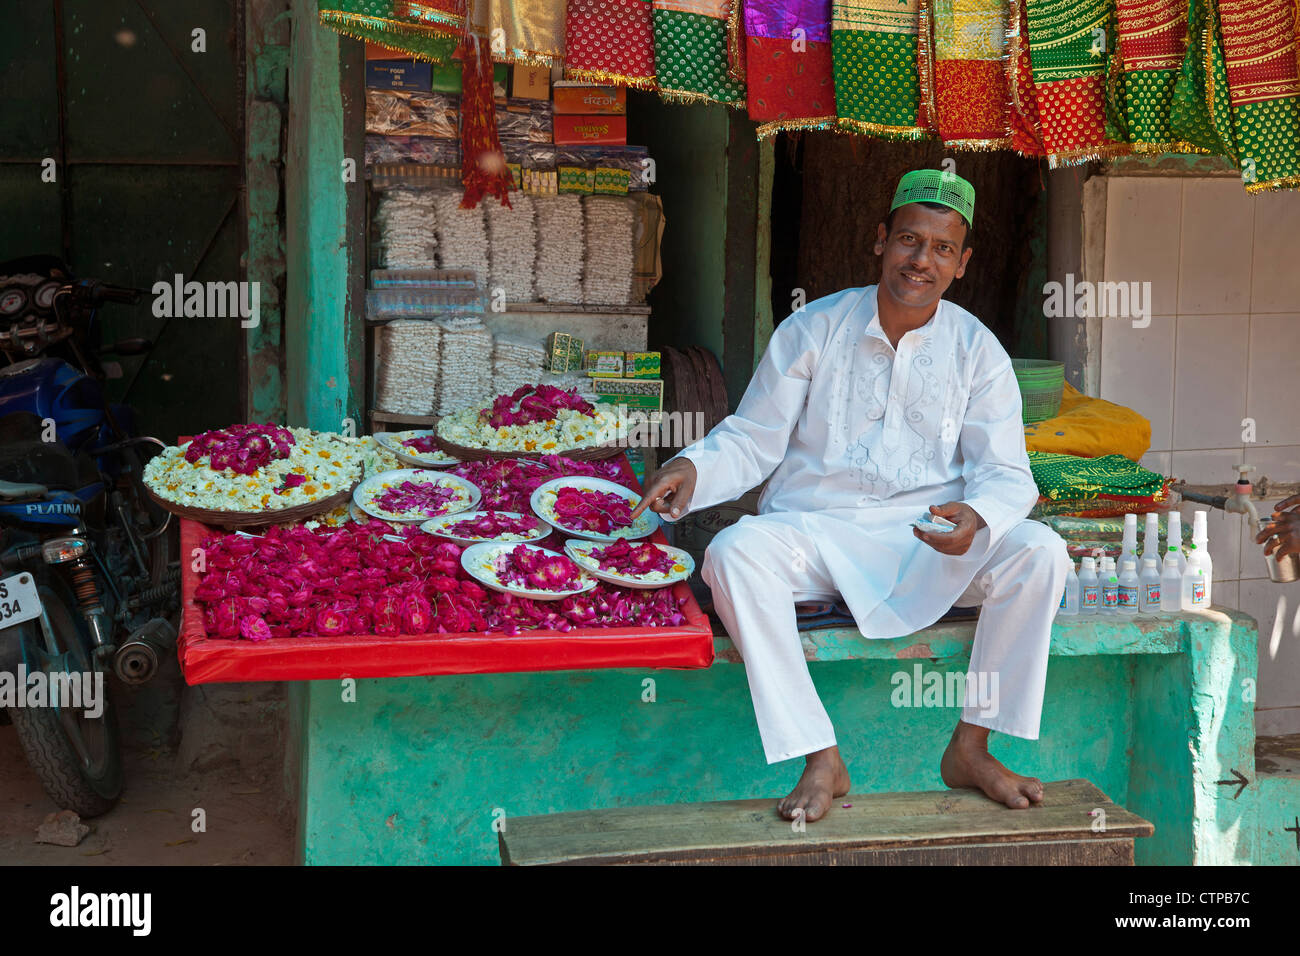 Vendor in front of shop selling scarfs and flowers as gifts for offerings near the Nizam-Ud-Din shrine in Delhi, India Stock Photo